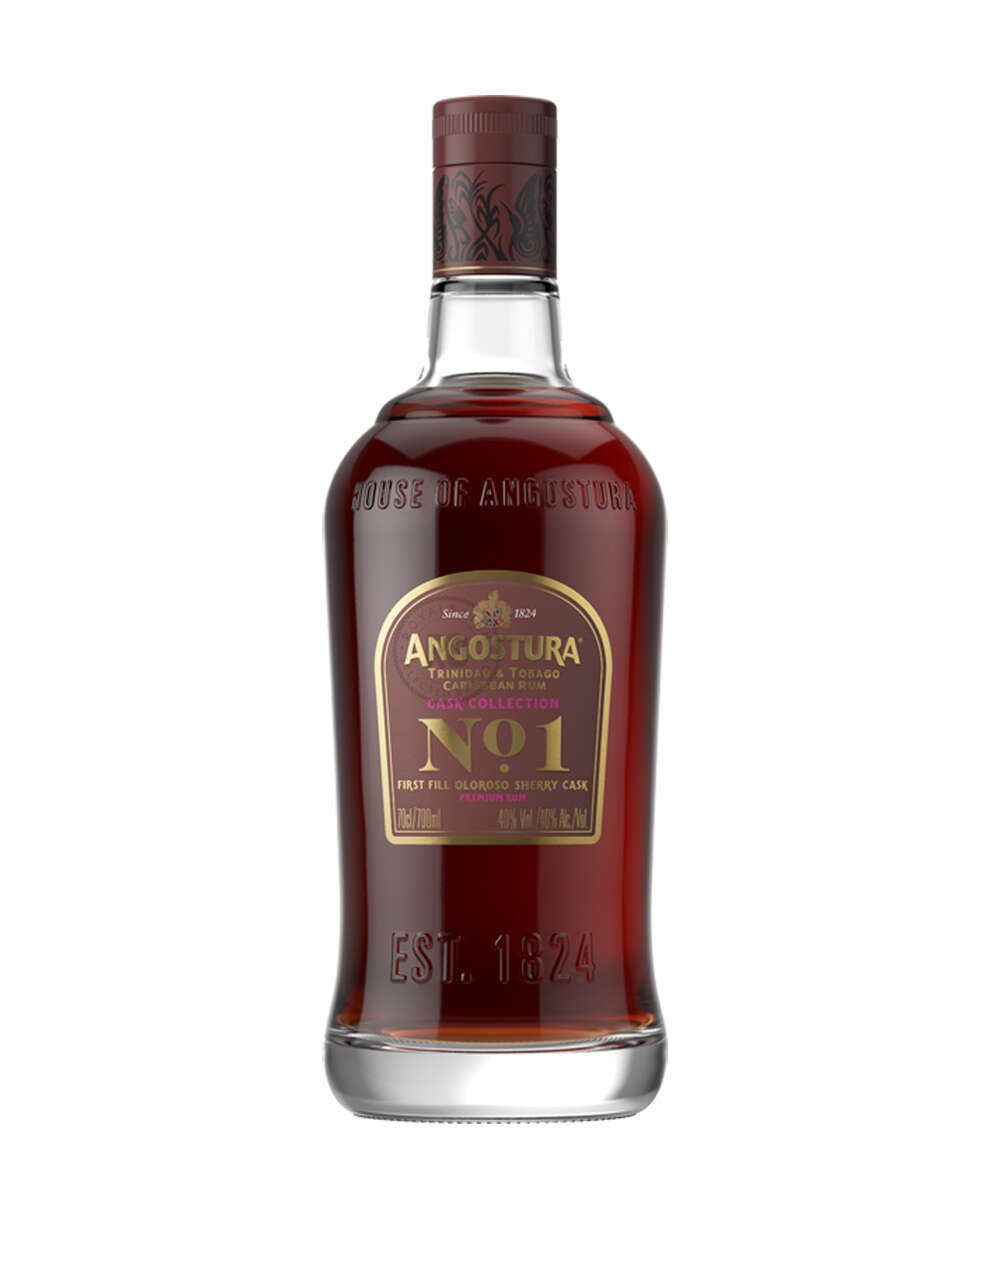 Angostura Cask Collection No.1 Oloroso Sherry Cask Rum